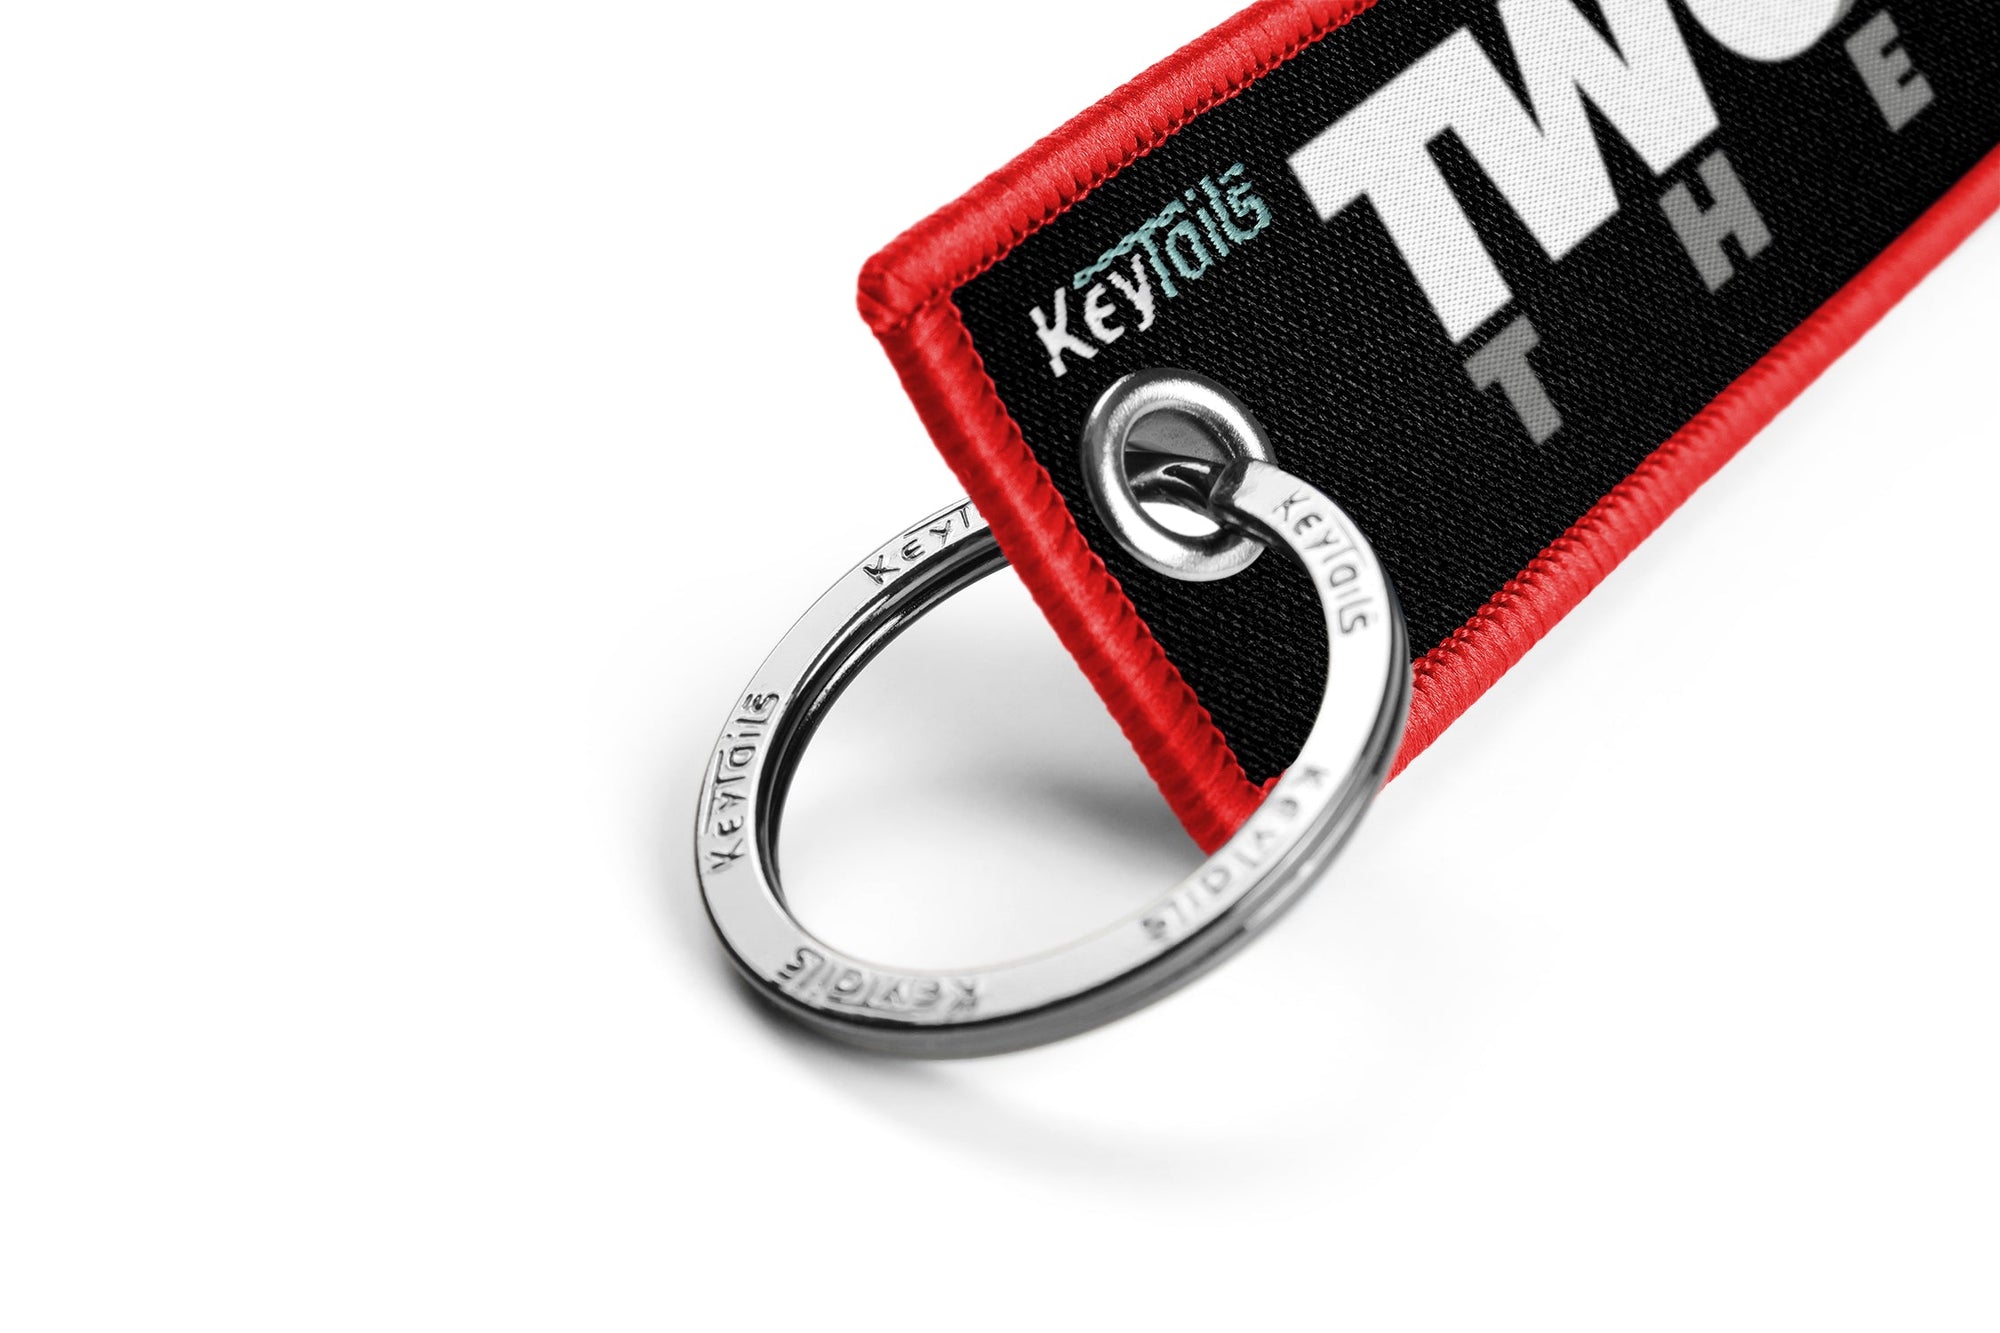 Two Wheel Therapy Keychain, Key Tag - Red